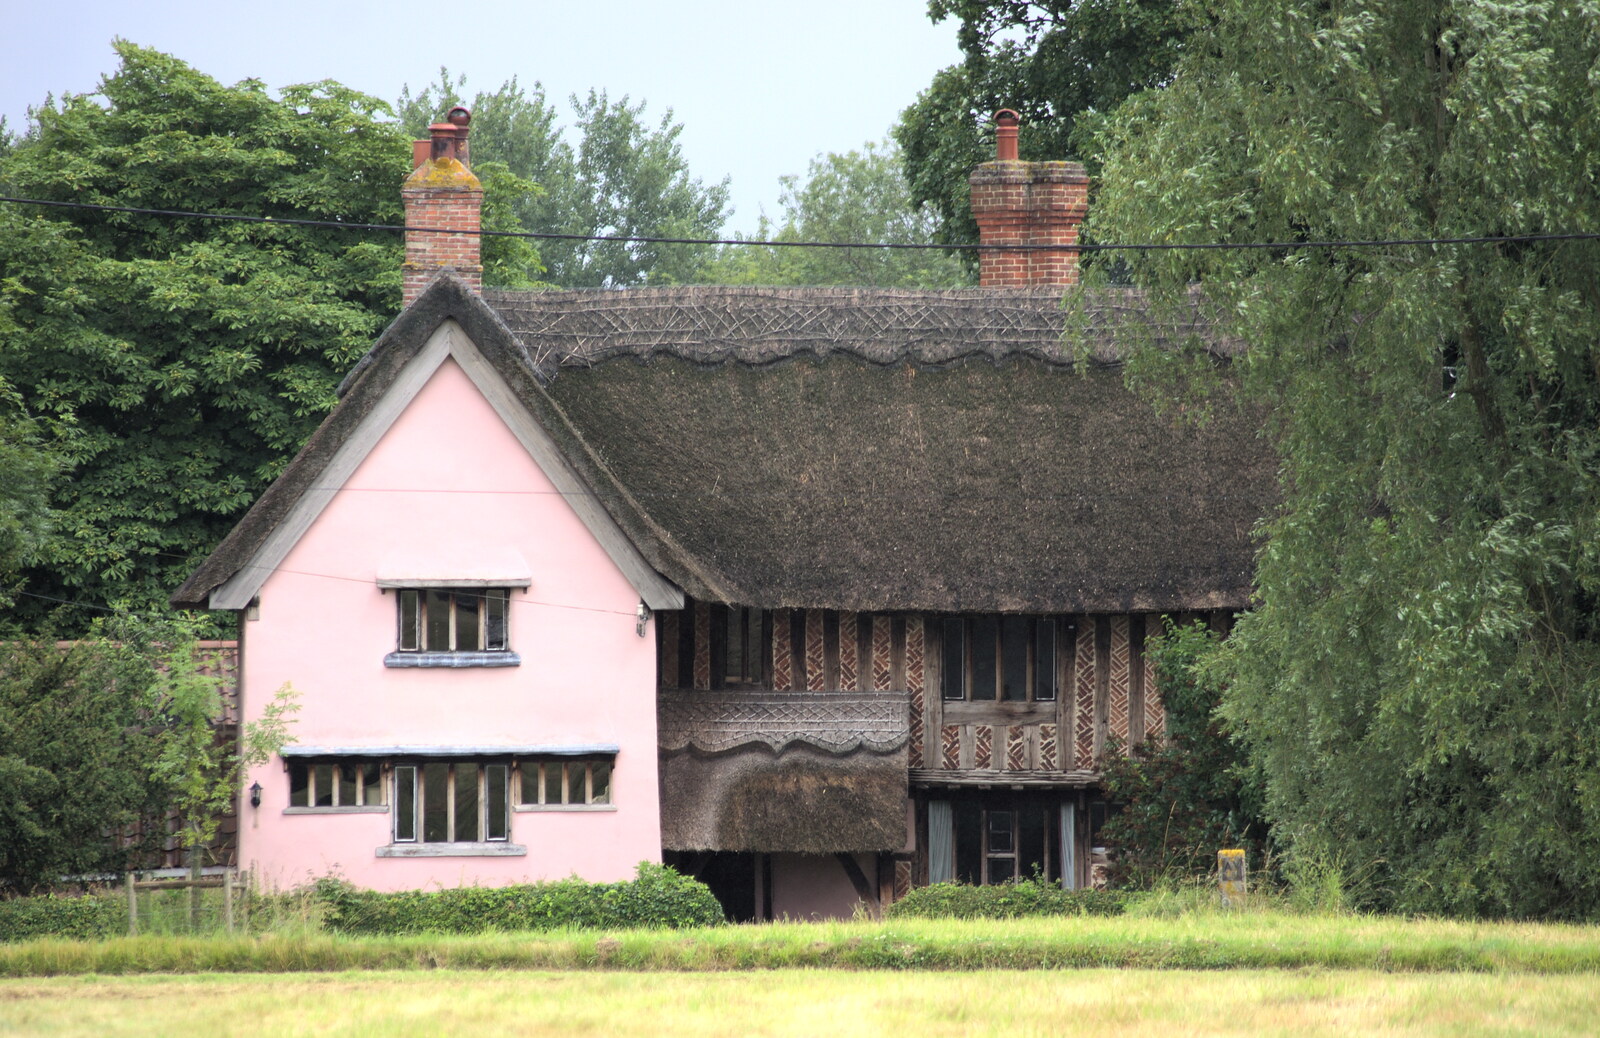 The old manor house across the green from Thrandeston Pig, Little Green, Thrandeston, Suffolk - 29th June 2014